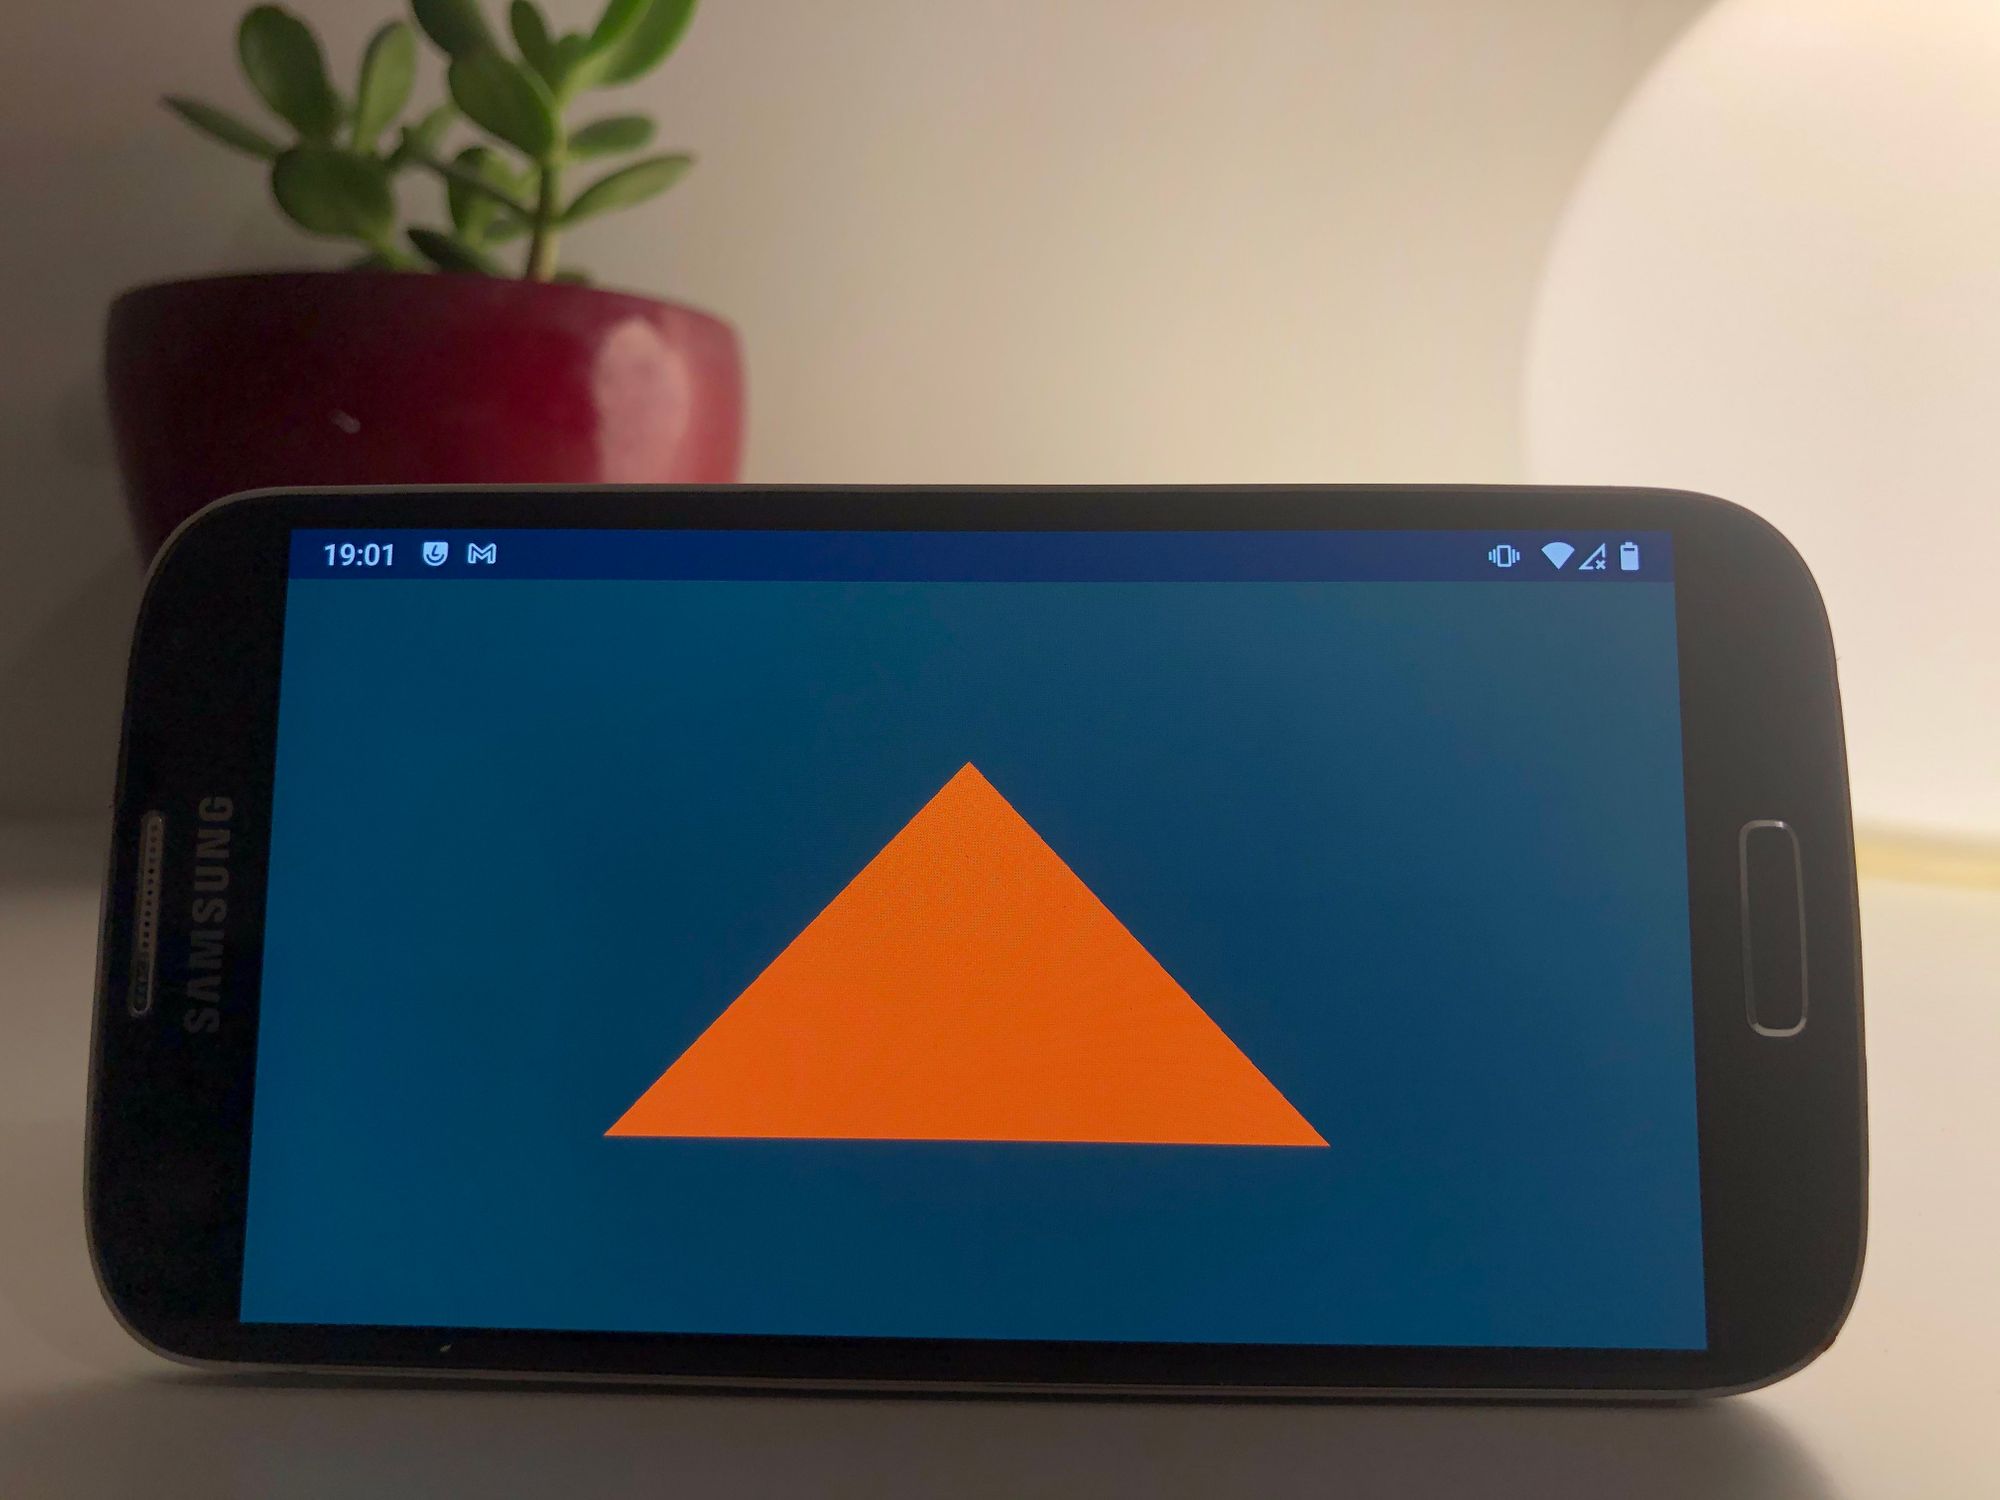 A triangle on an Android phone with a plant behind it.